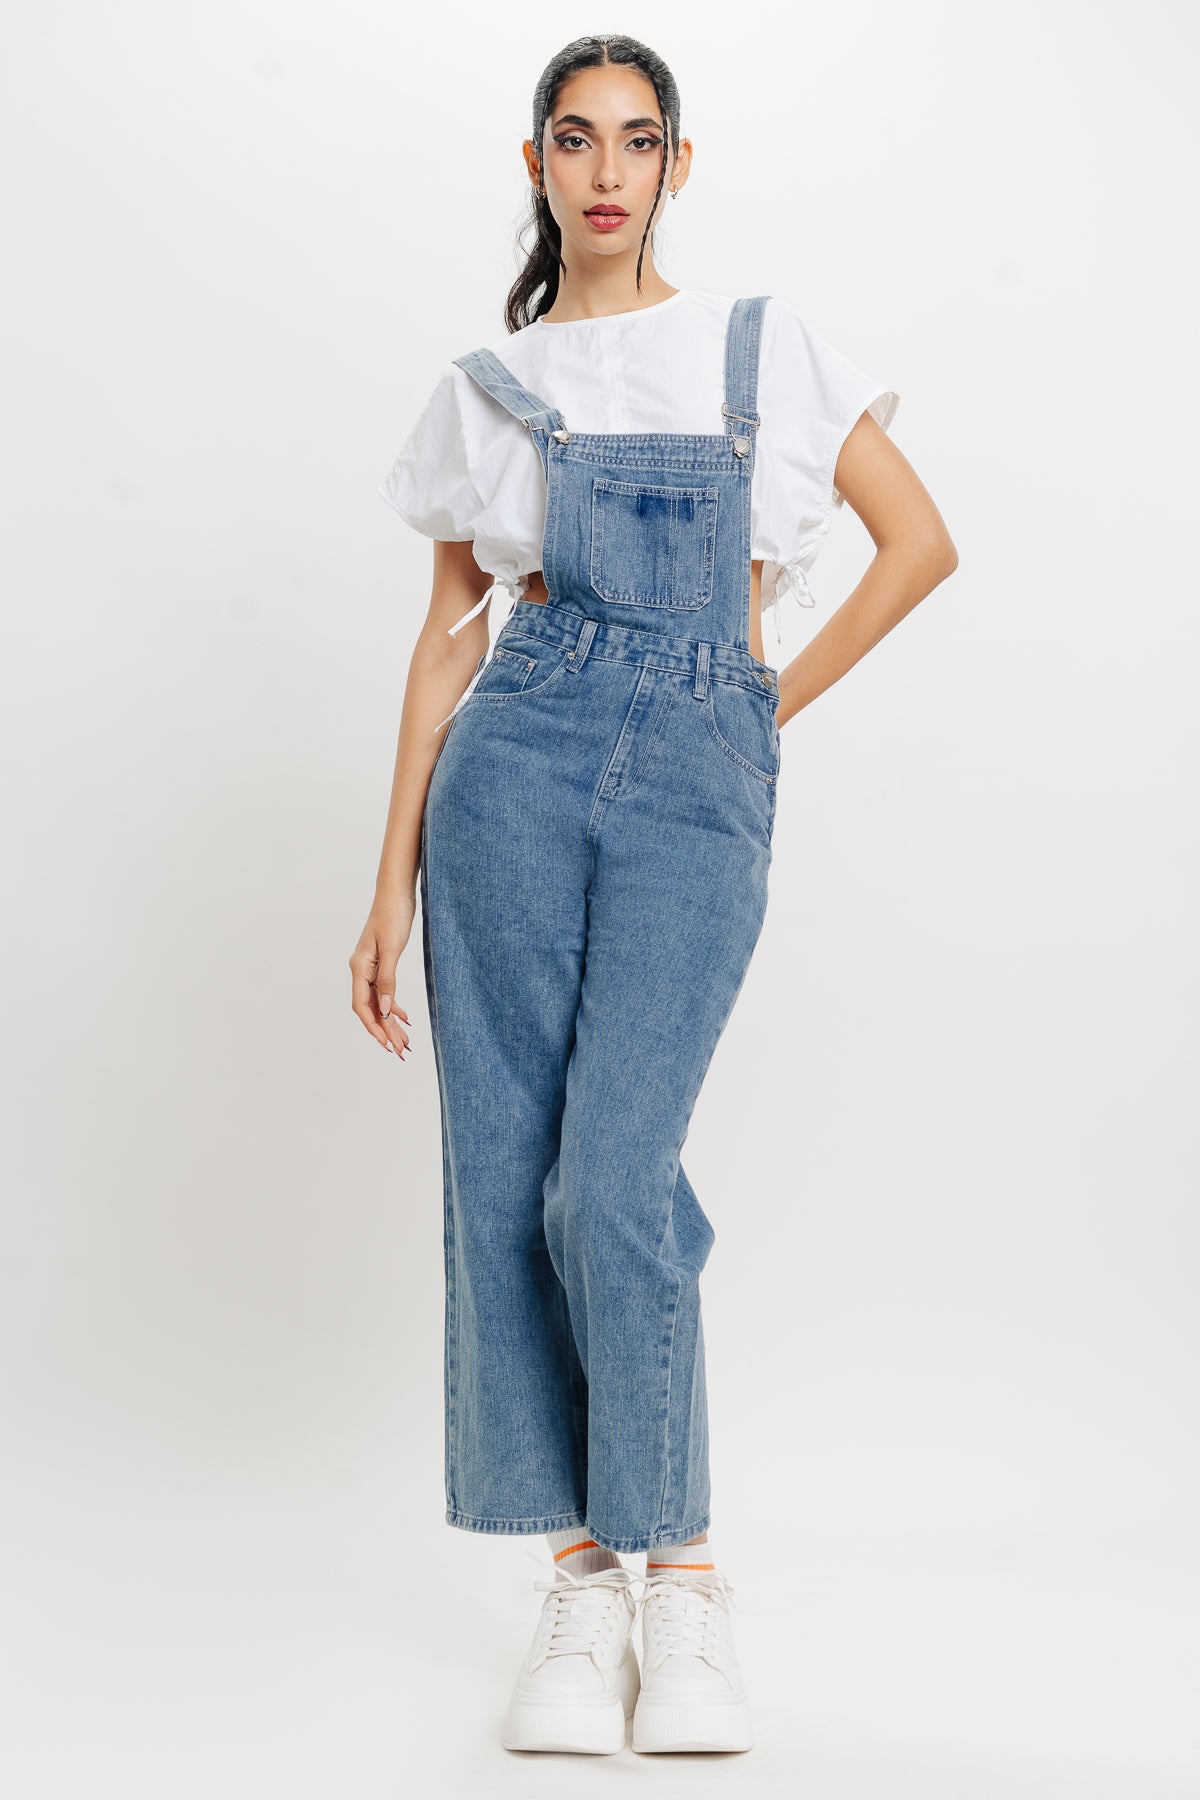 Cowgirl Fleece Lined Denim Overall | Ladies Clothing, Dresses & Jumpsuits  :Beautiful Designs by April Cornell